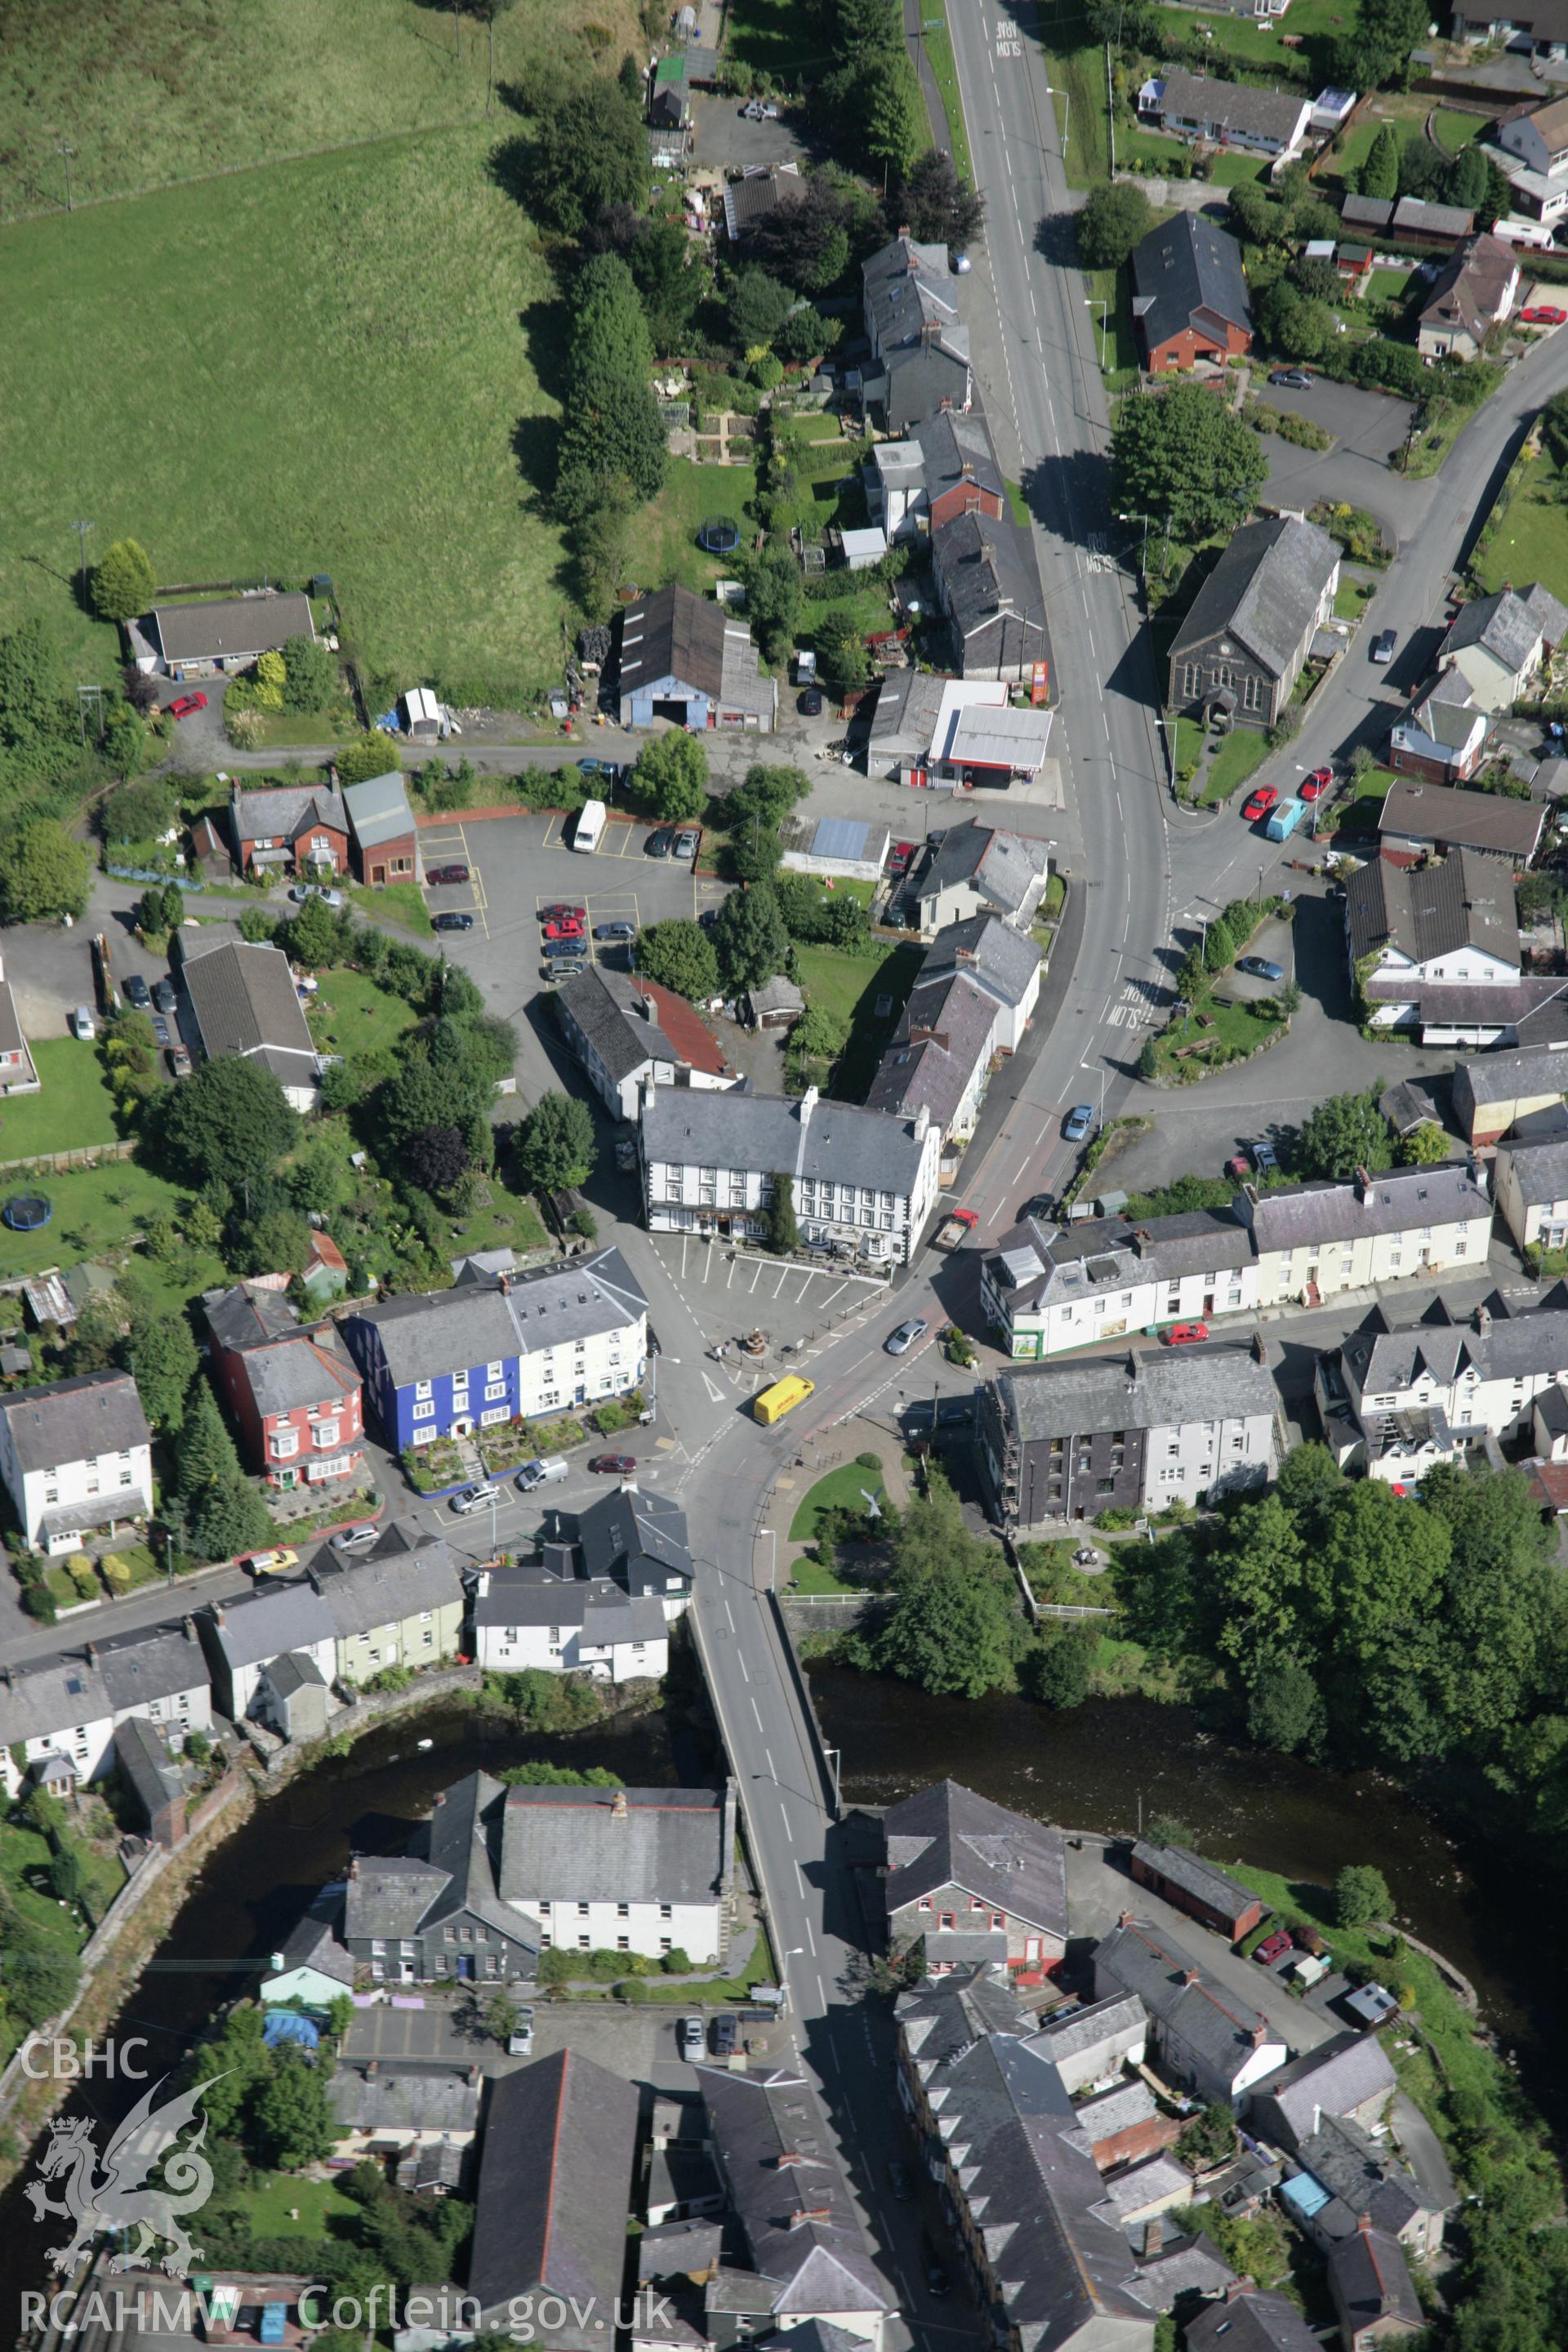 RCAHMW colour oblique aerial photograph of Llanwrtyd Wells town centre and bridge viewed from south-west Taken on 02 September 2005 by Toby Driver